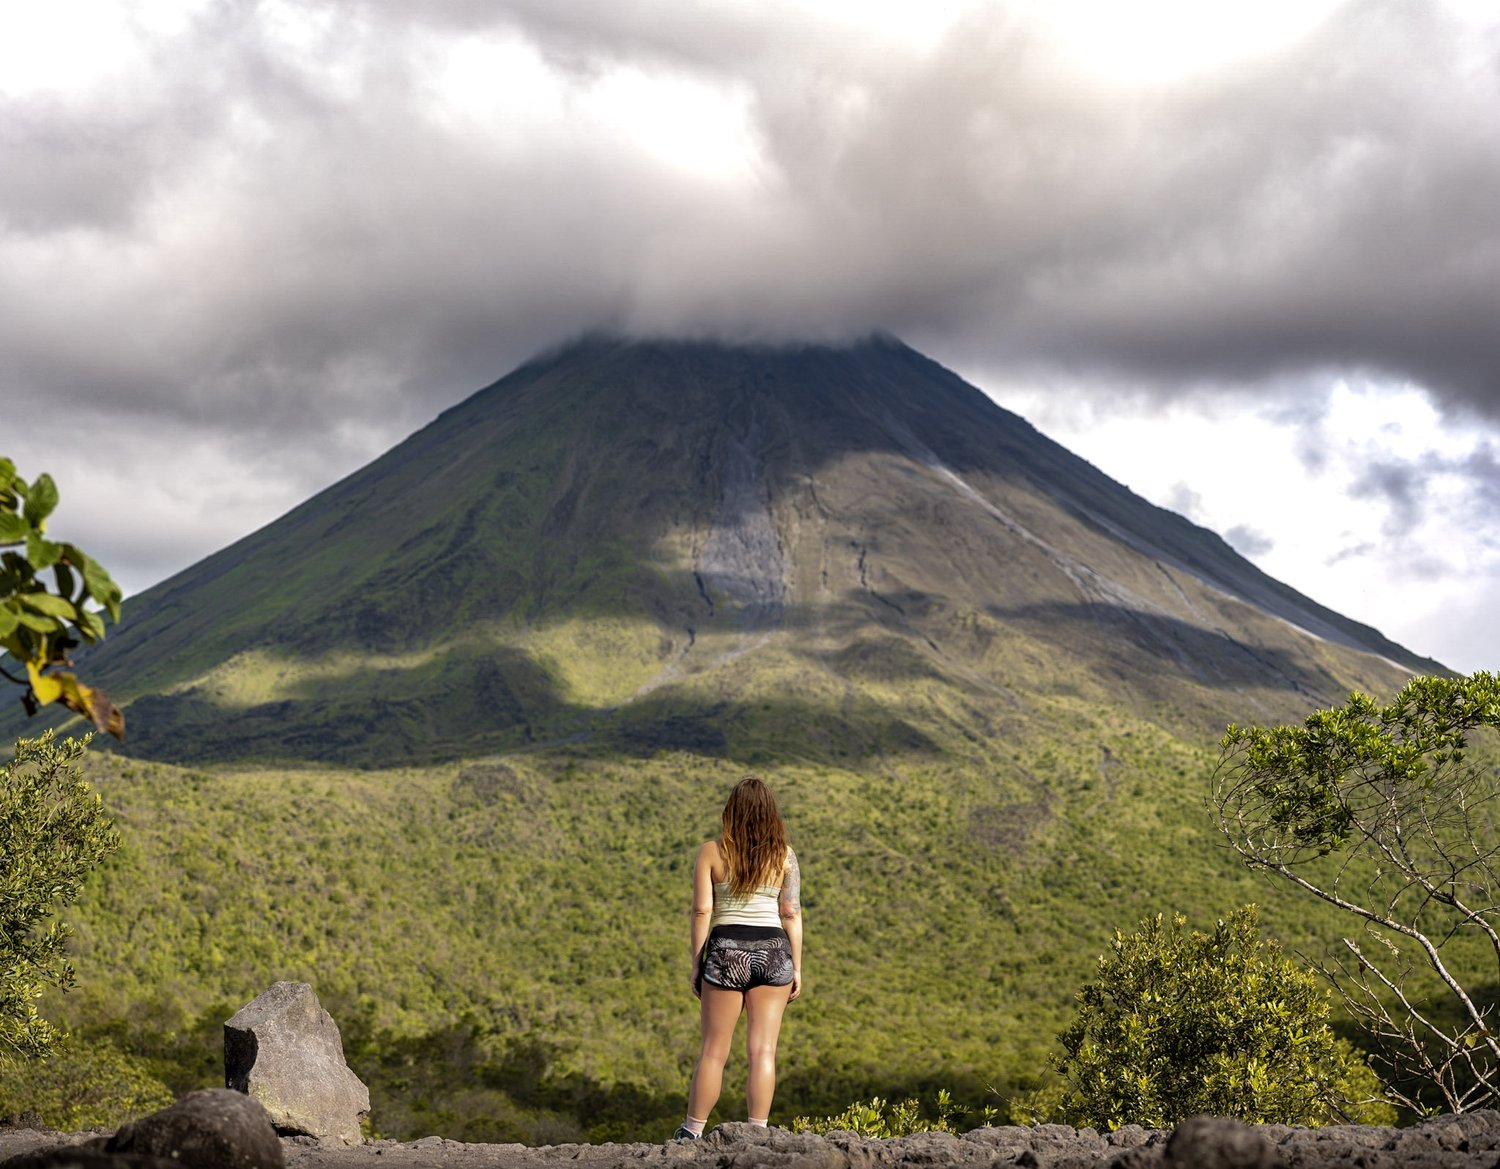 Get the best trip in Costa Rica by exploring its natural wonders and cultural treasures.